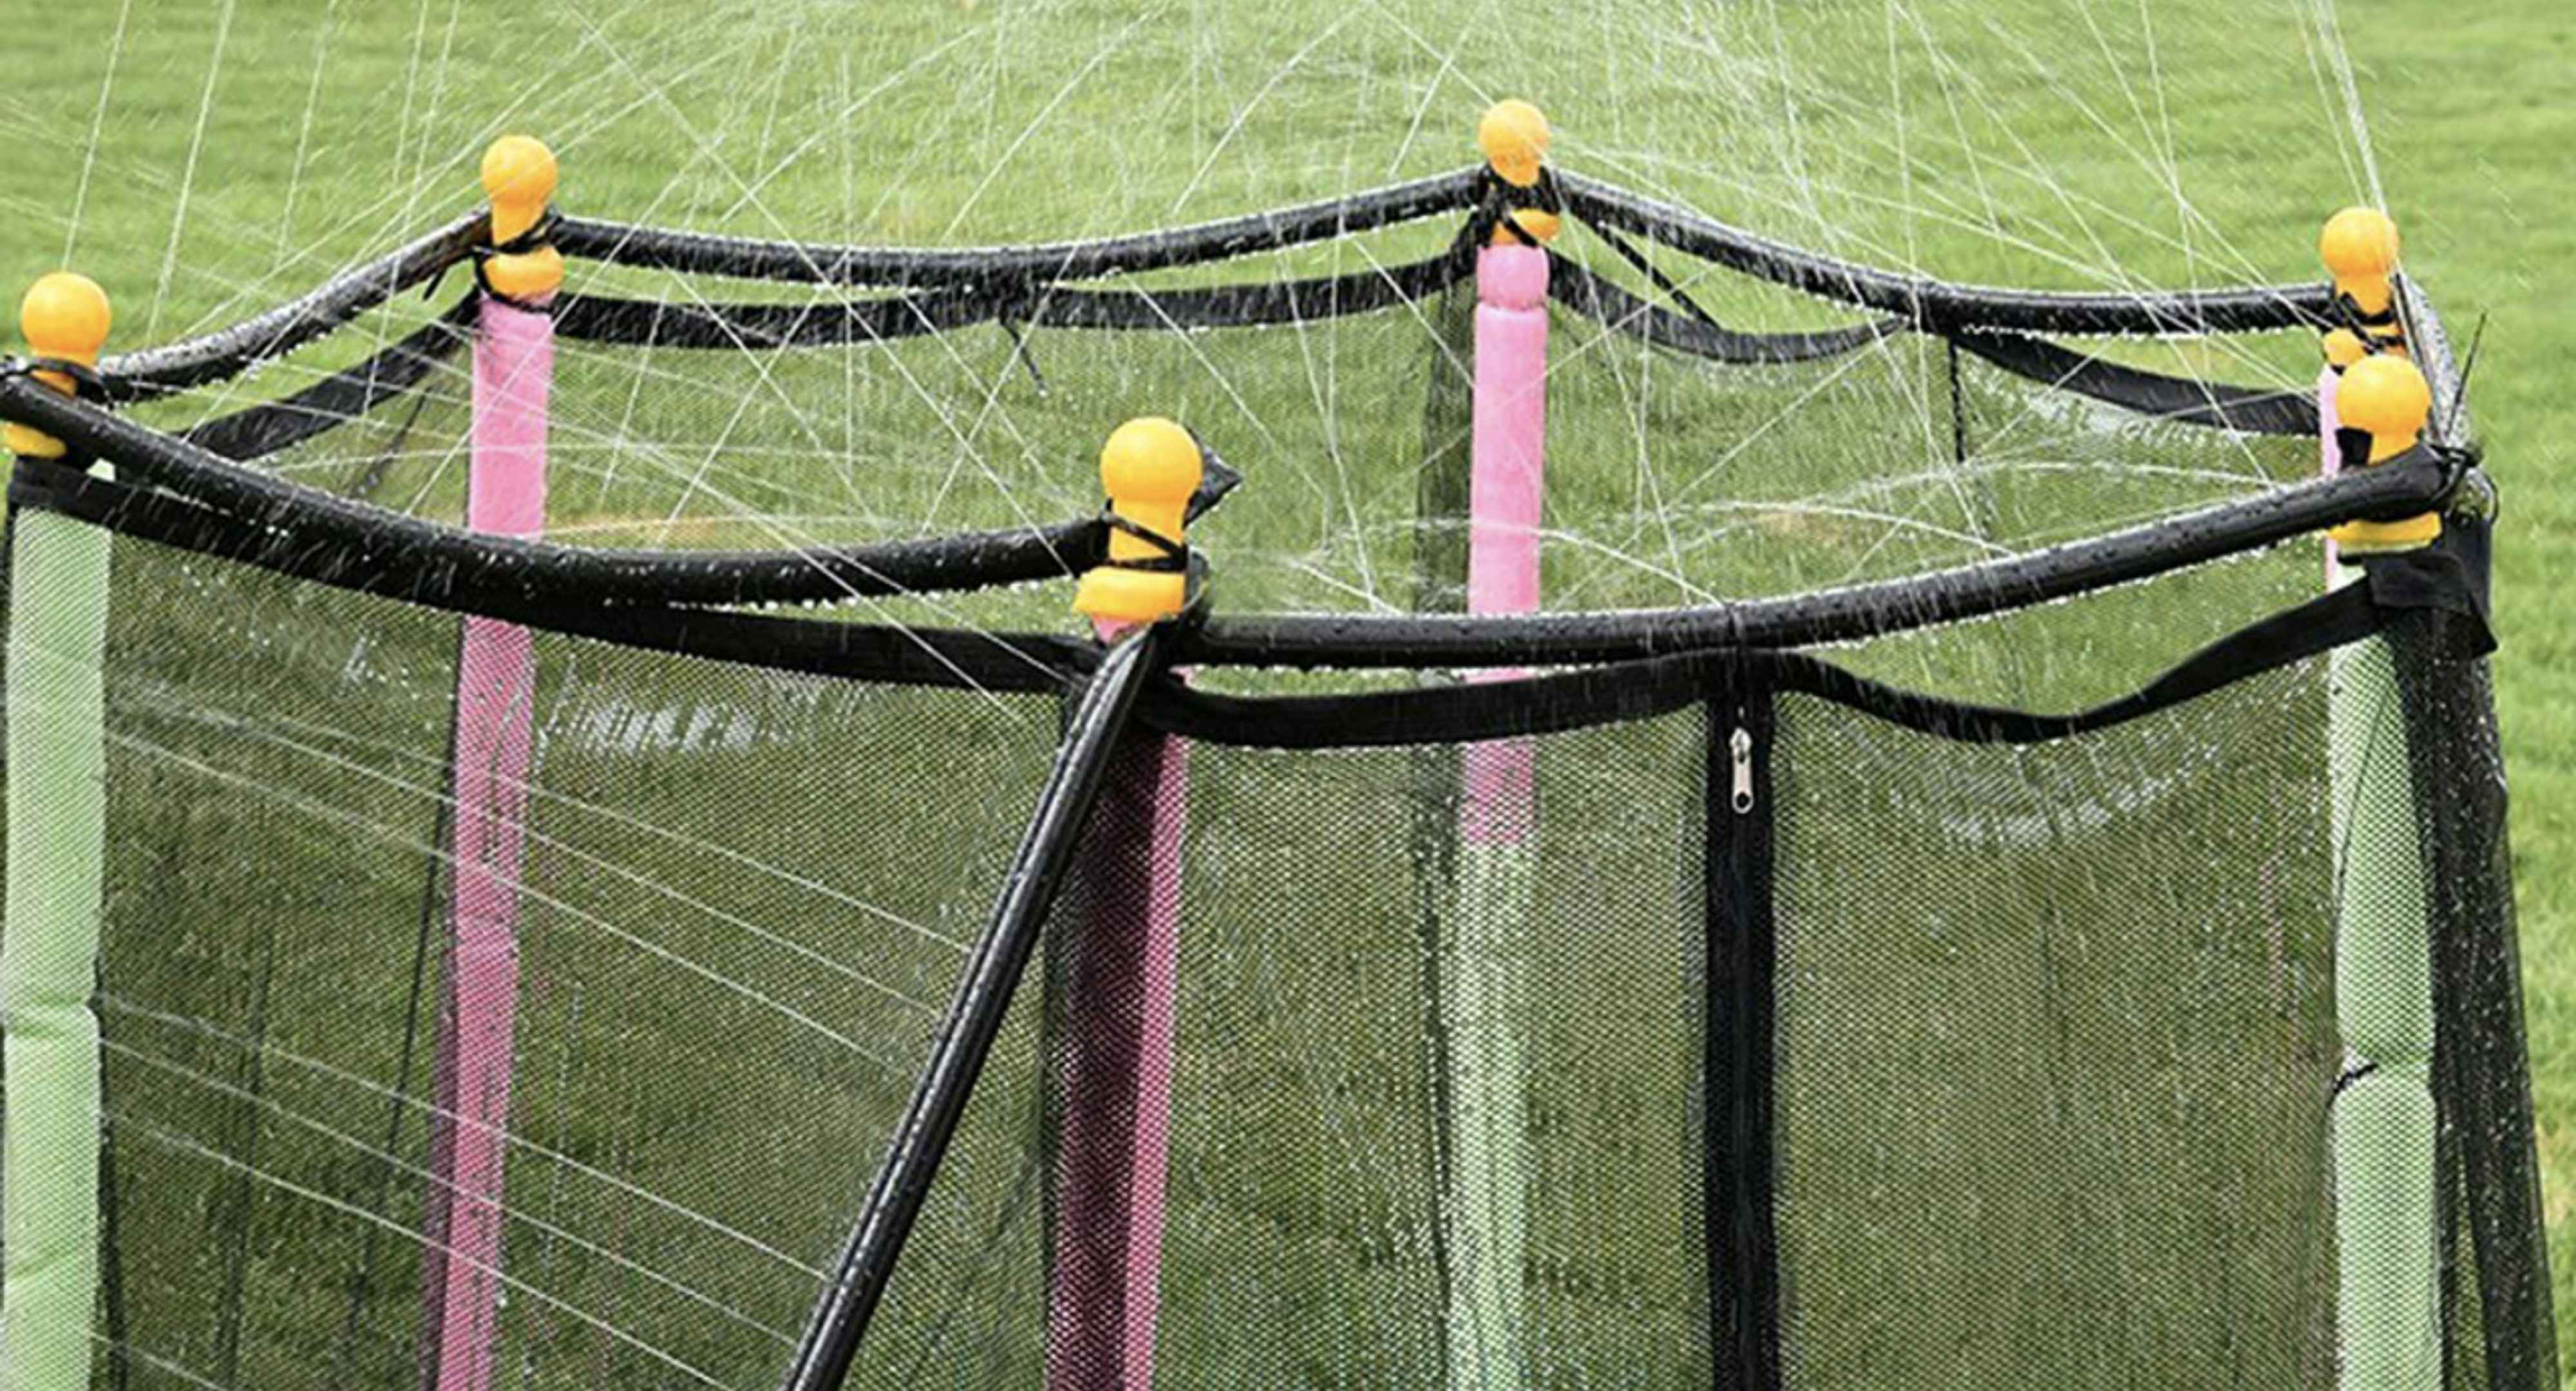 sprinkler attached to the top of a trampoline